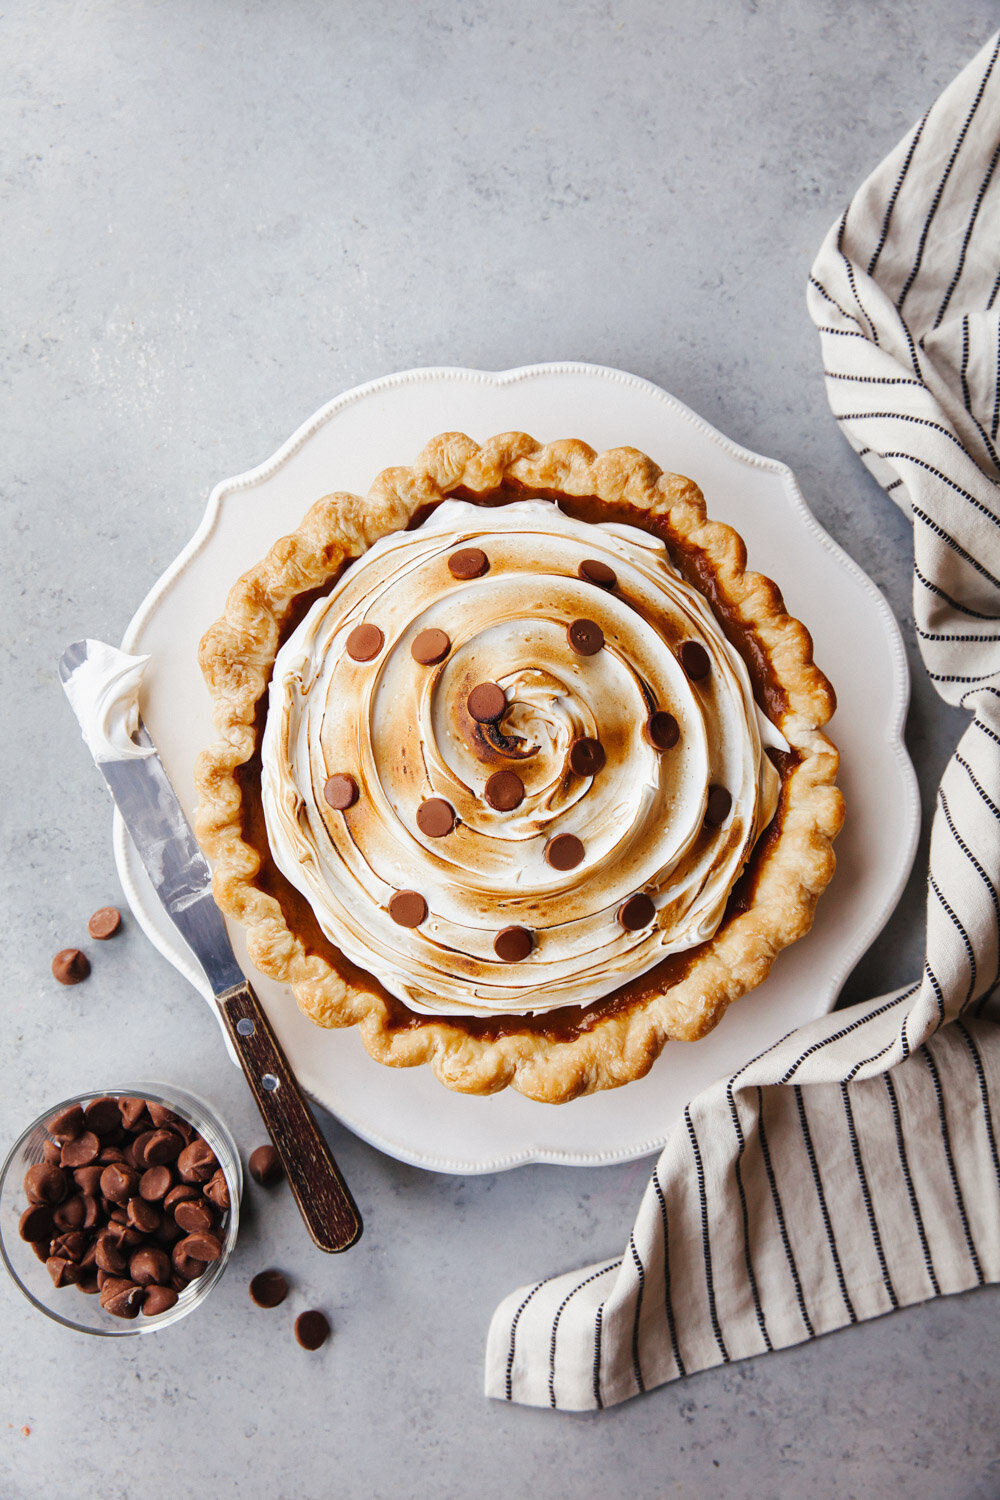 Black-bottom Pumpkin Pie with toasted meringue topping.